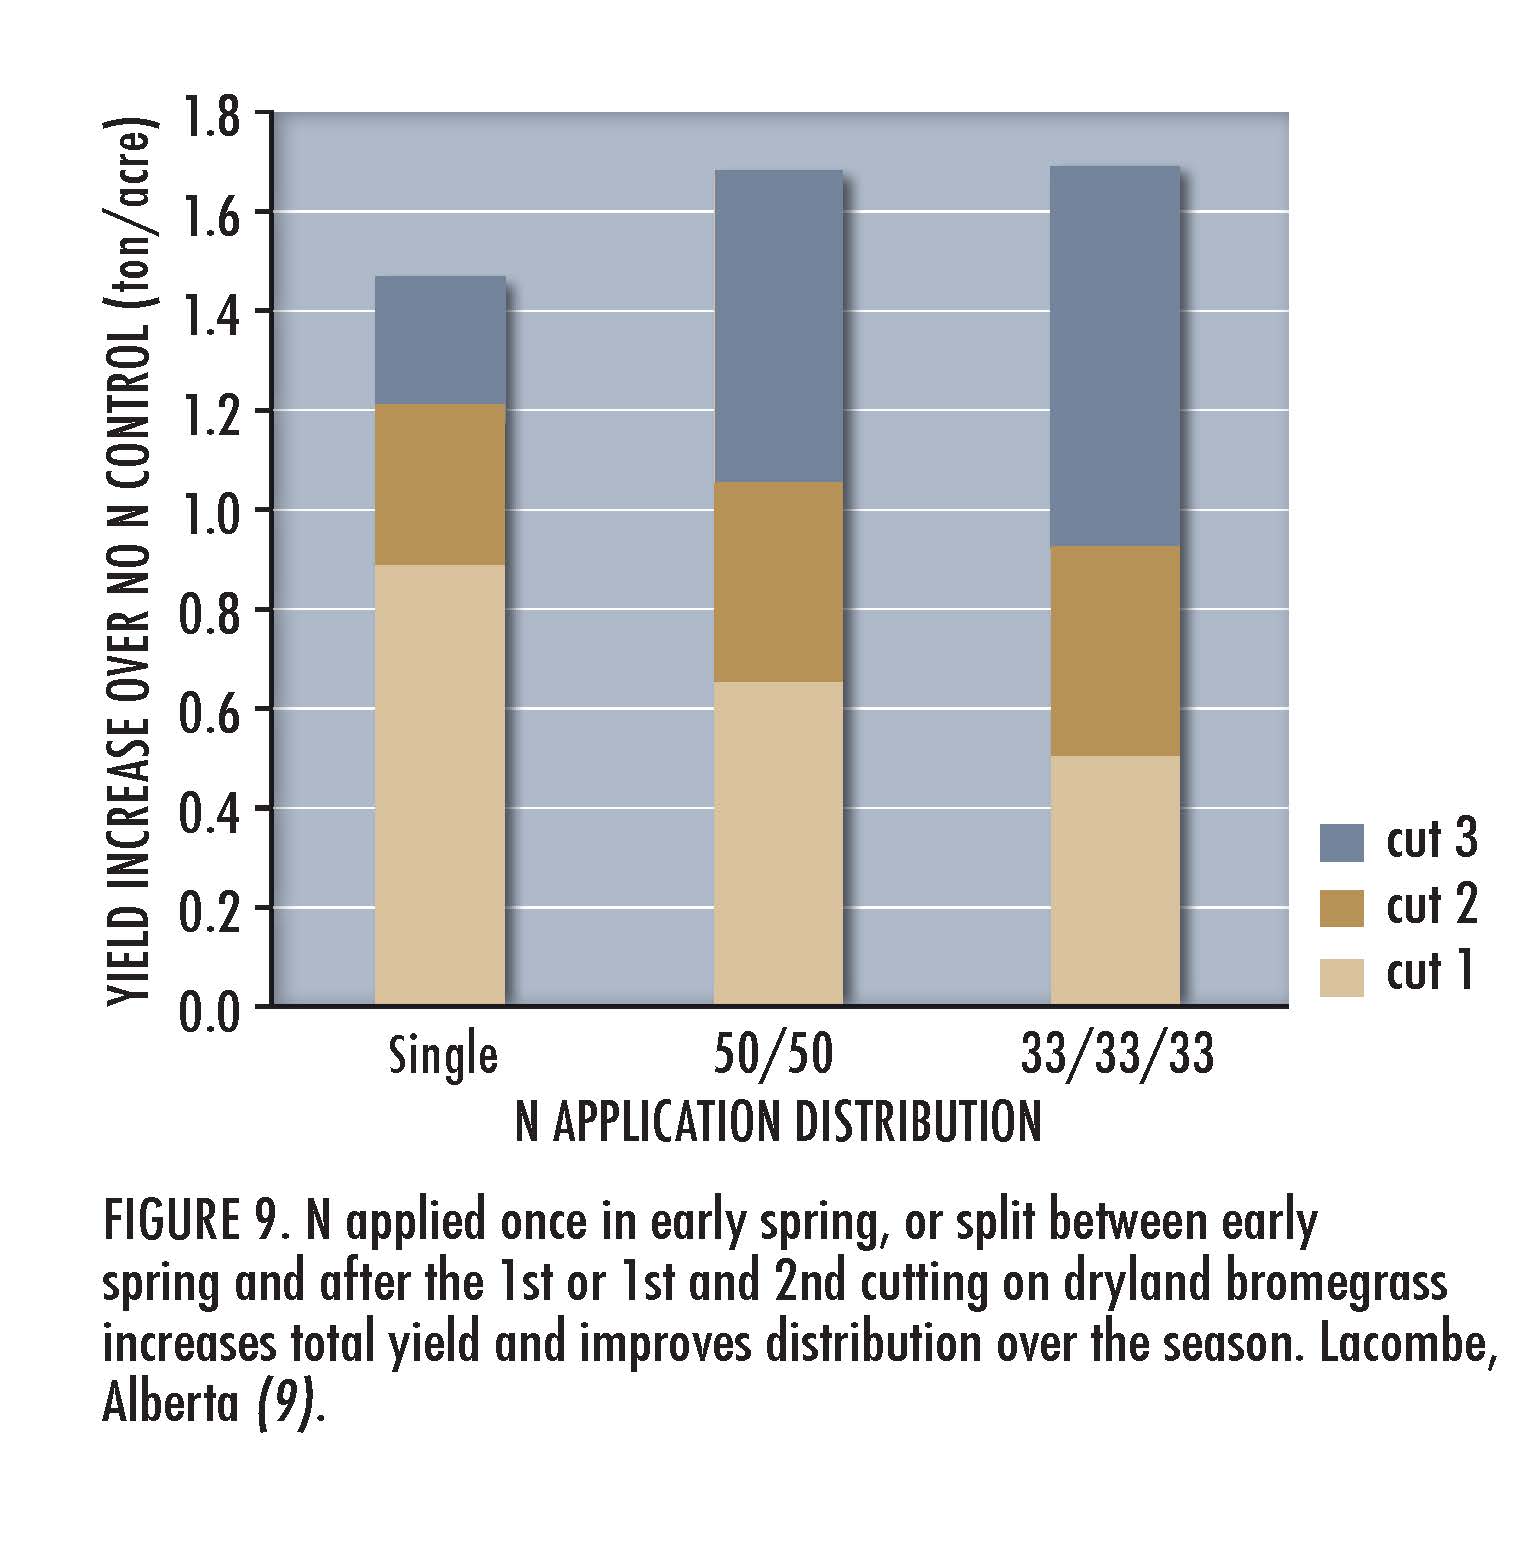 Figure 9. N applied once in early spring, or split between early spring and after the 1st or 2nd cutting on dryland bromegrass increases total yield and improves distribution over the season. Lacombe, Alberta (9).